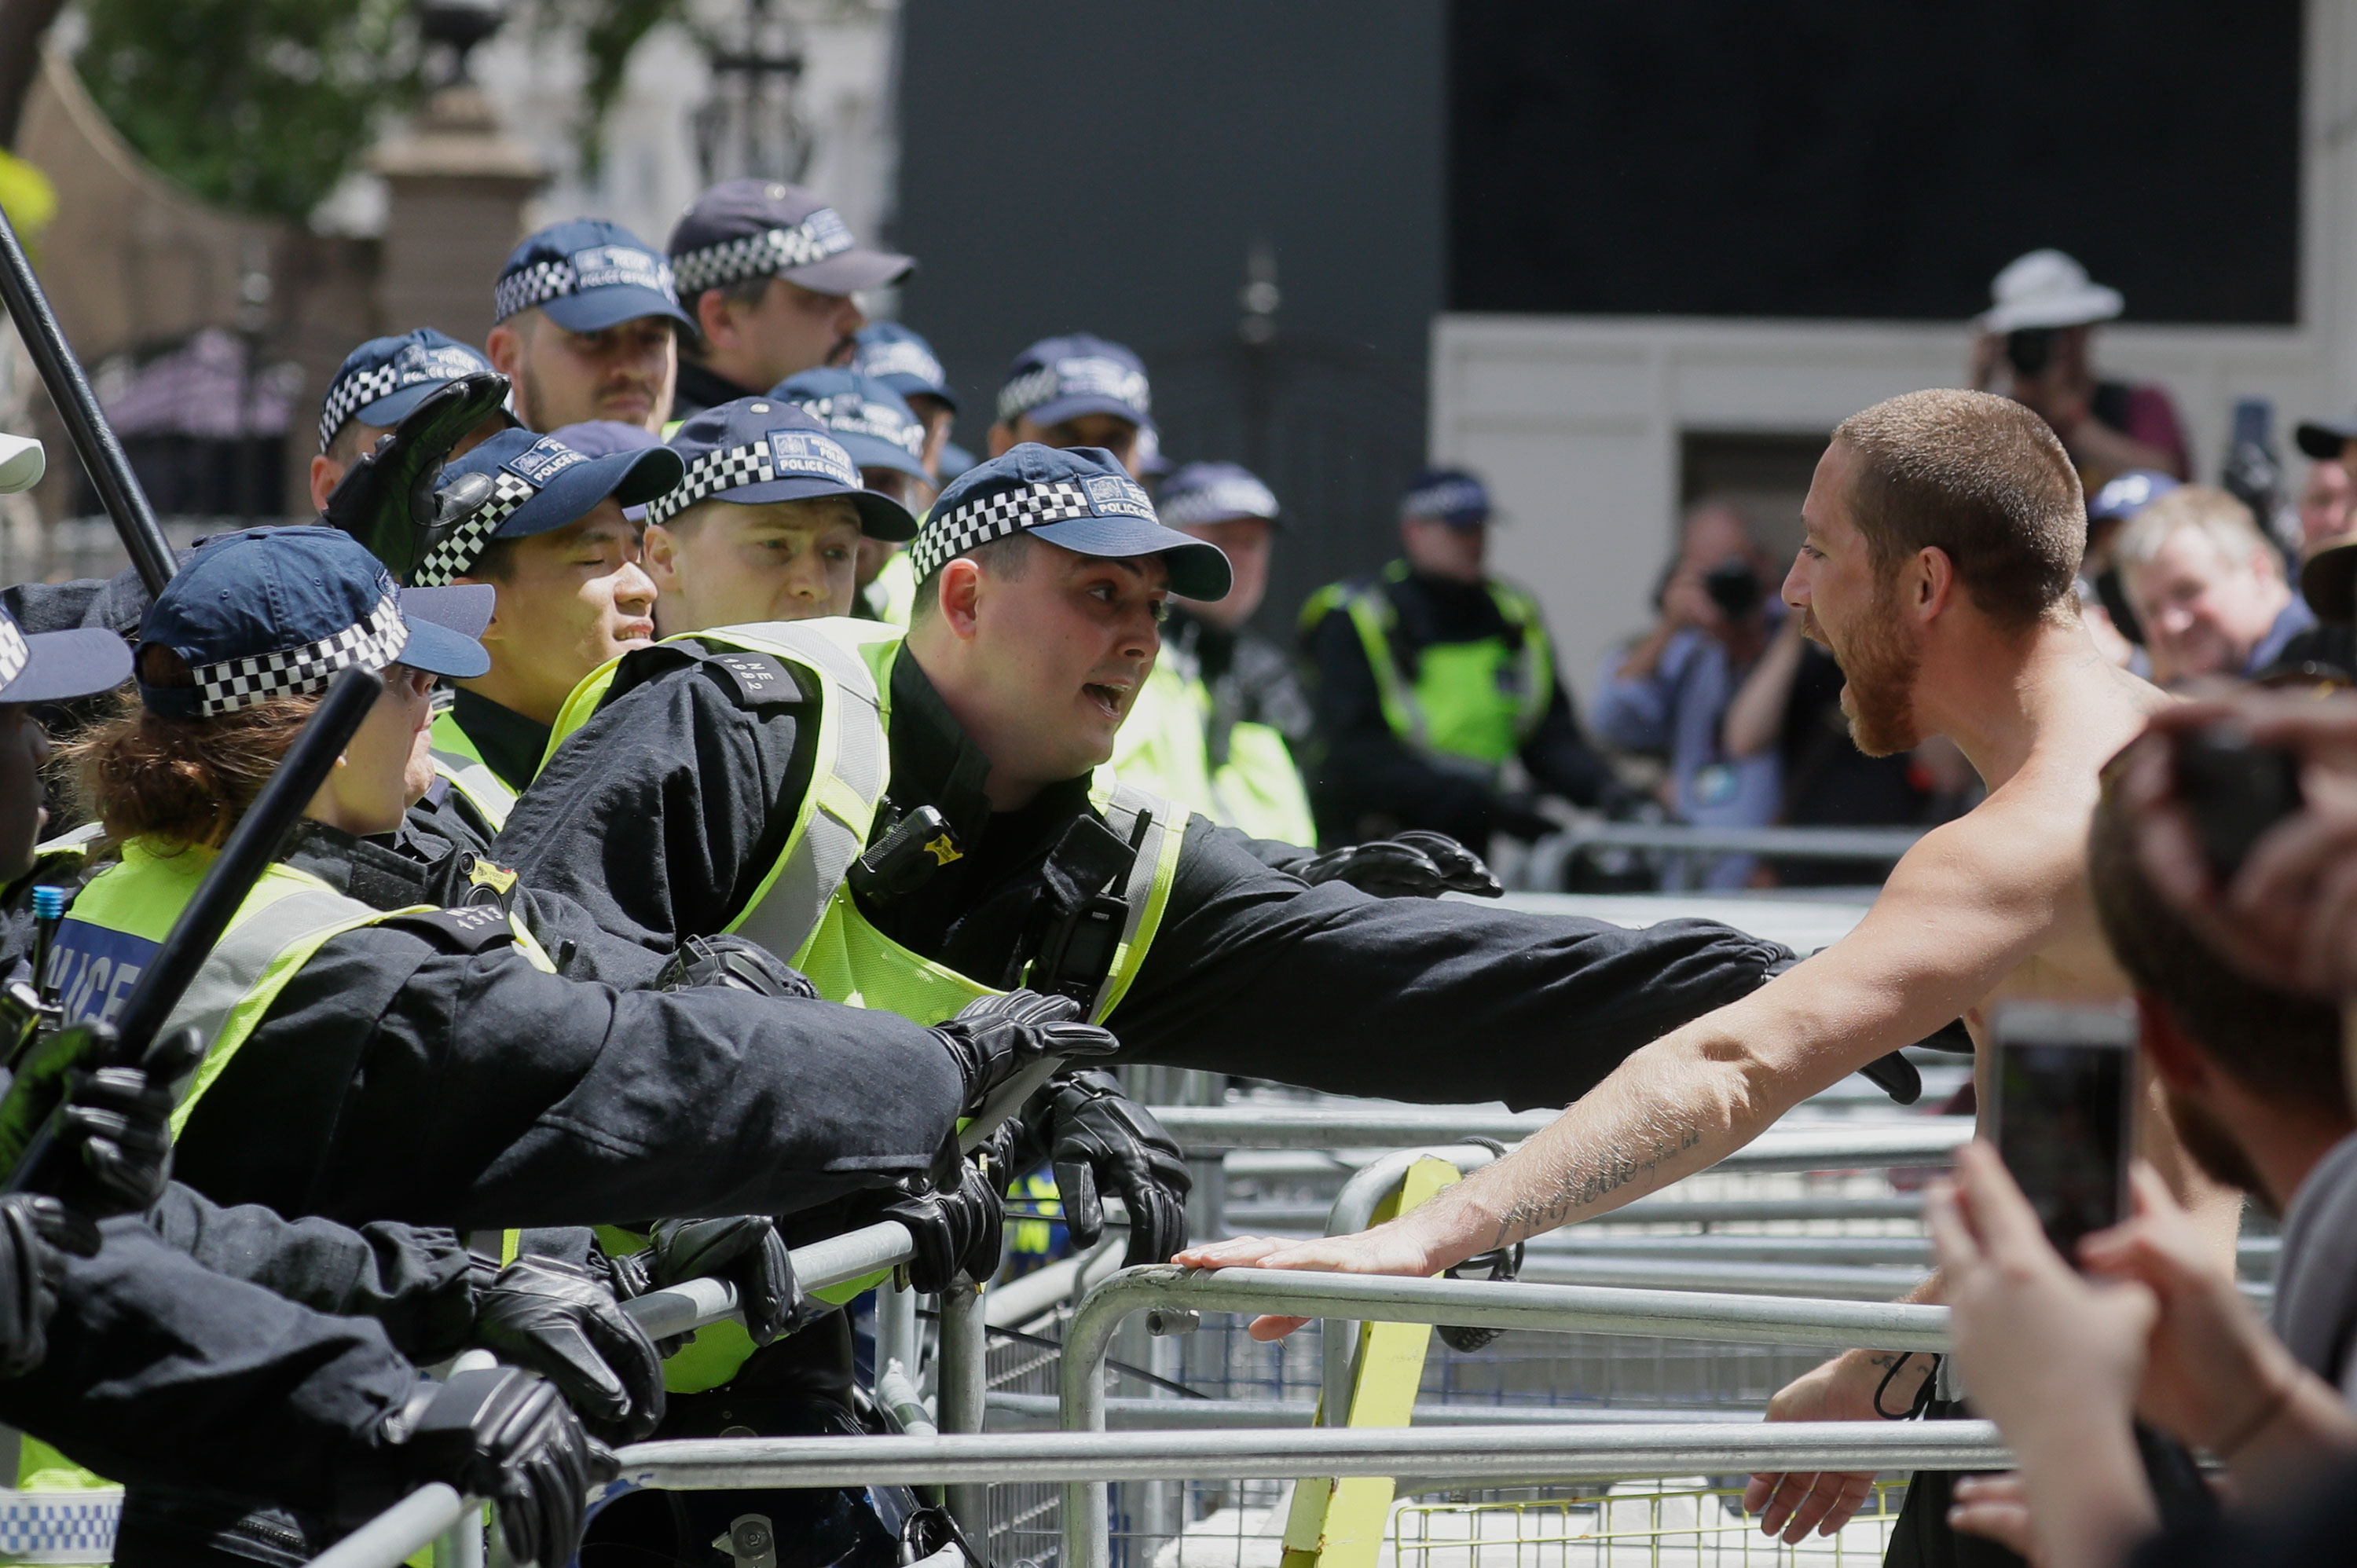 Police officers scuffle with members of far-right groups protesting in central London on Saturday, June 13.